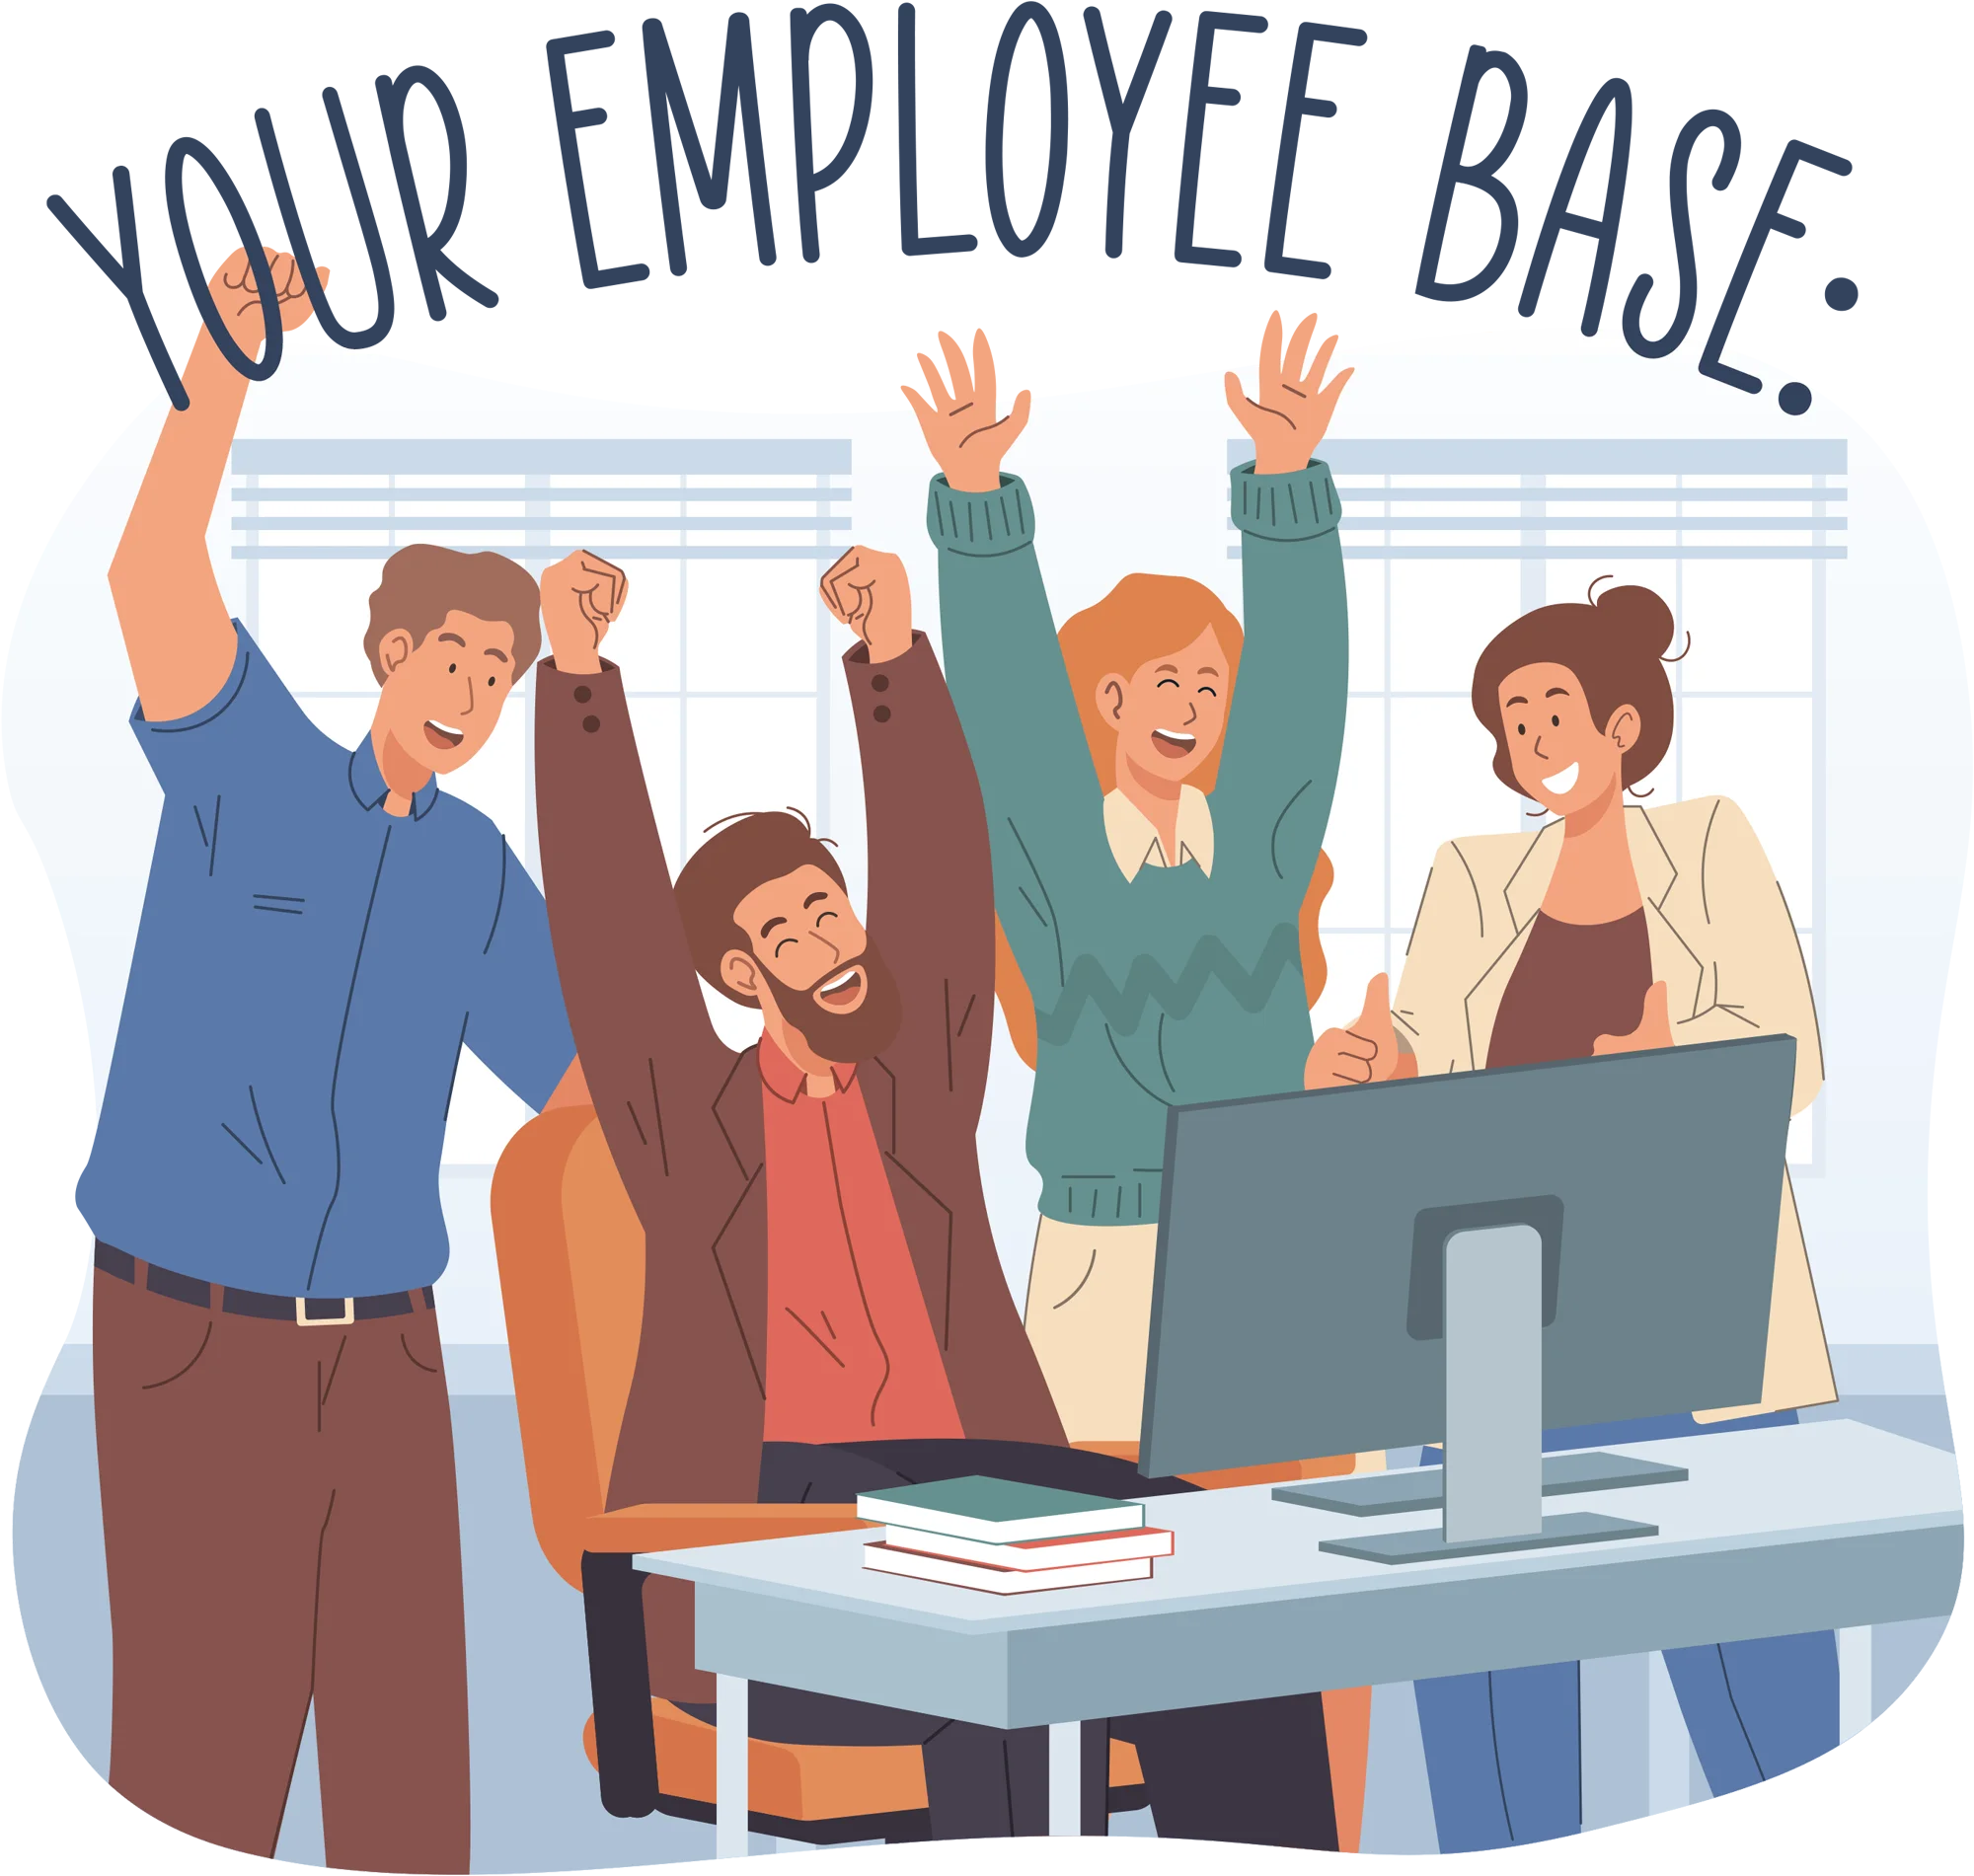 Your Employee Base typography above an illustration of coworkers celebrating while standing at a desk holding a desktop computer and books